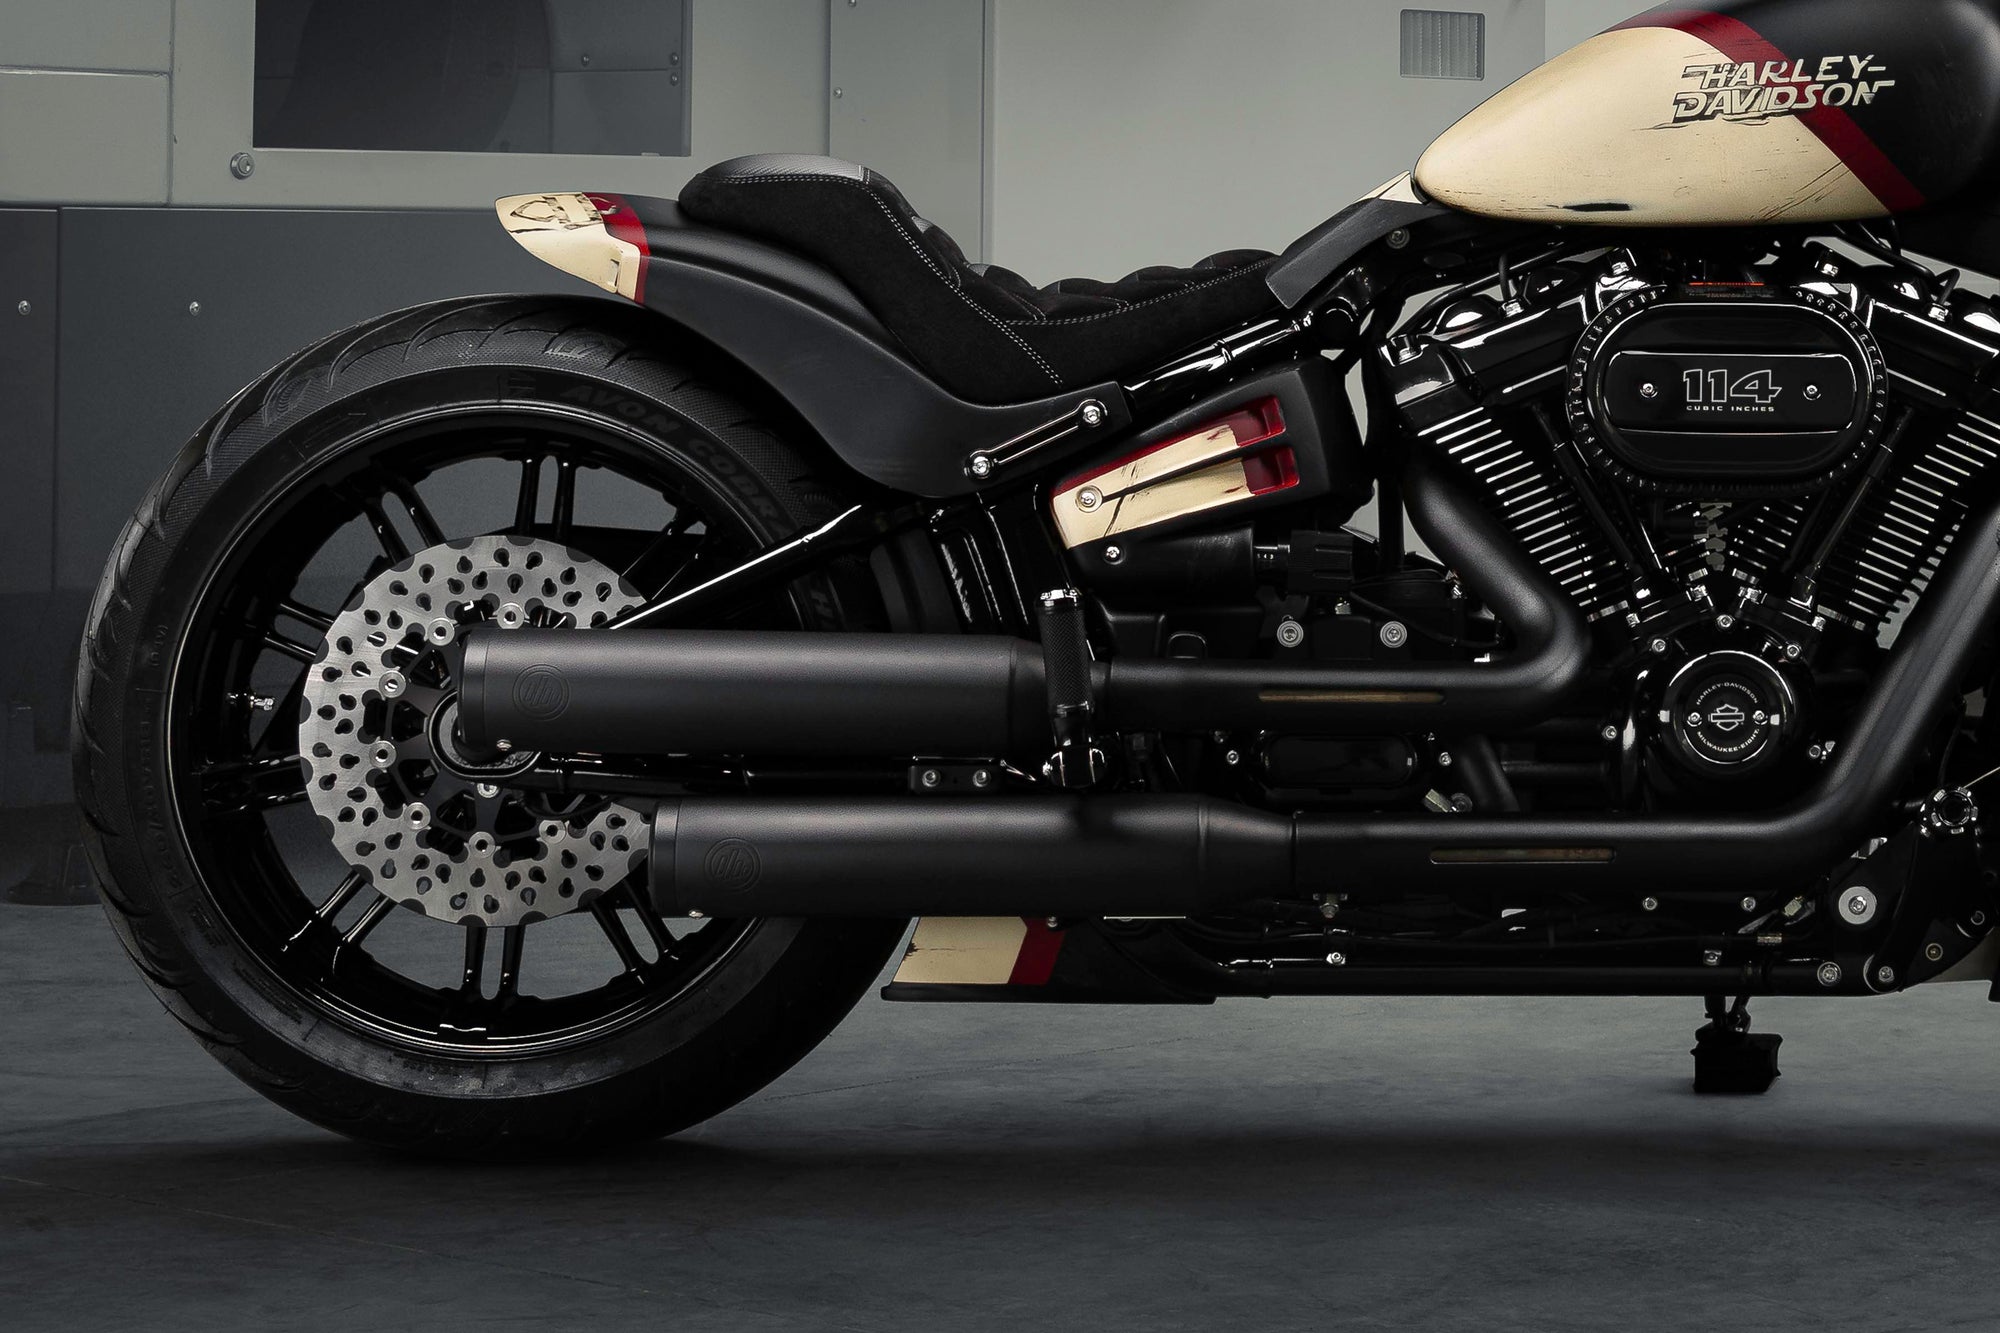 Zoomed Harley Davidson motorcycle with Killer Custom parts from the side in a modern bike shop